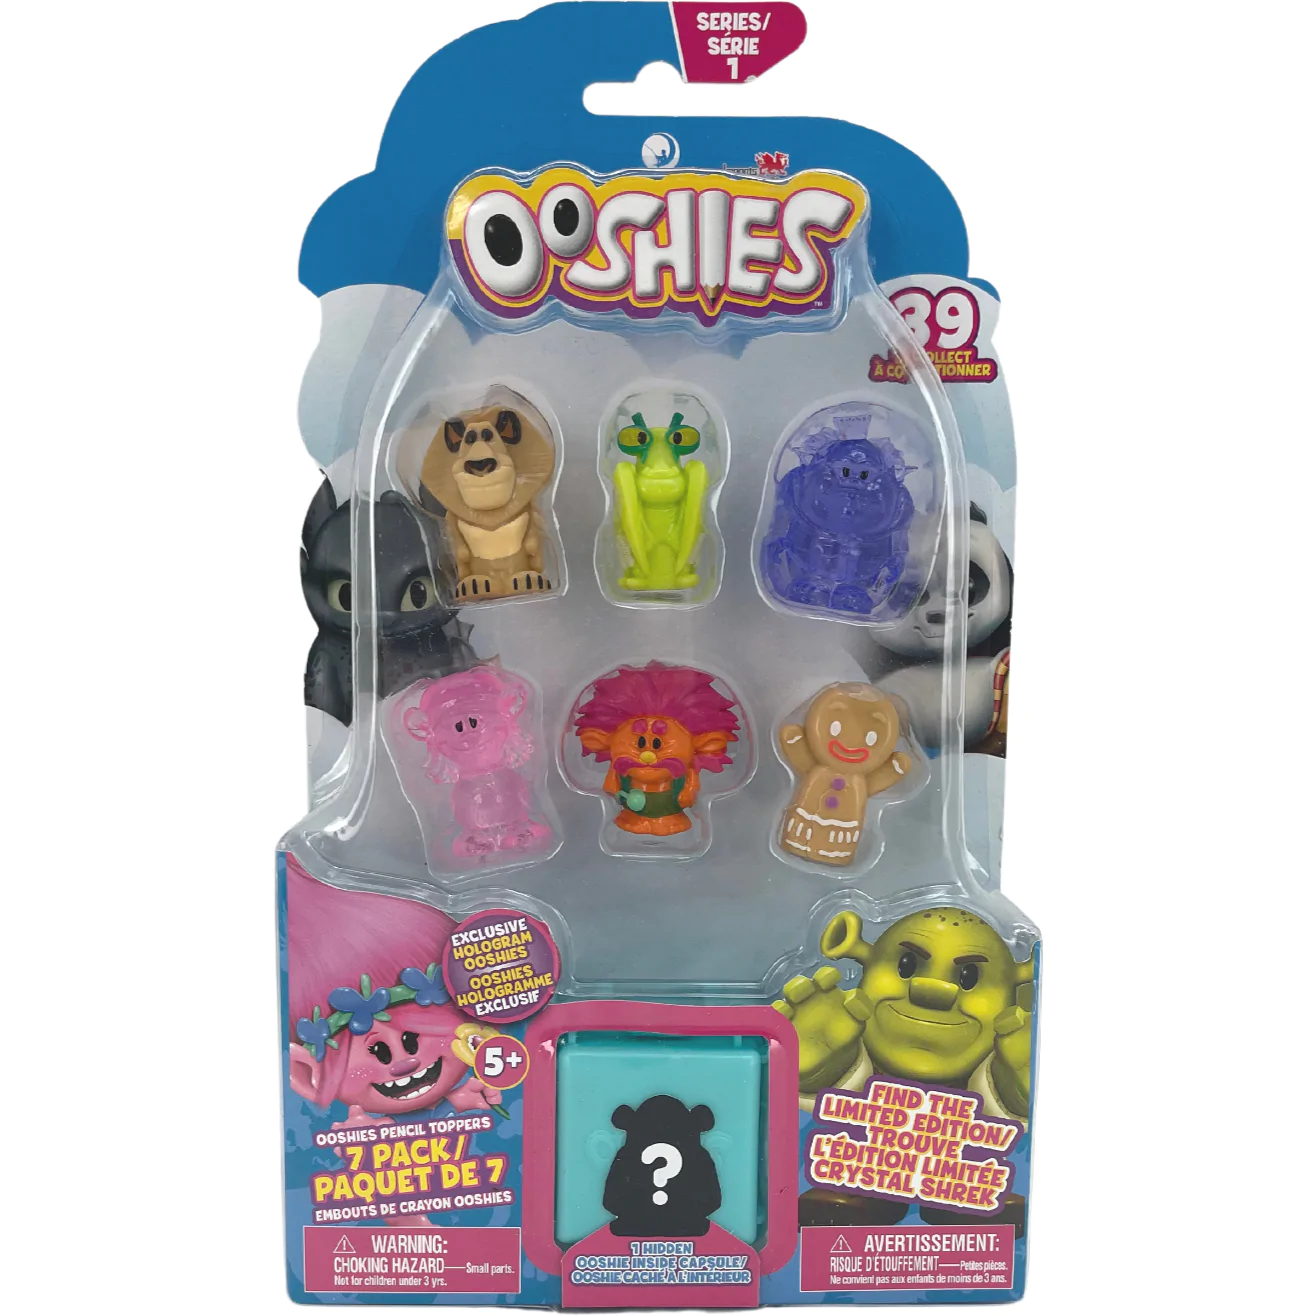 Ooshies Pencil Toppers Mystery Pack / 7 Piece Set / Series 1 / Cartoon Characters